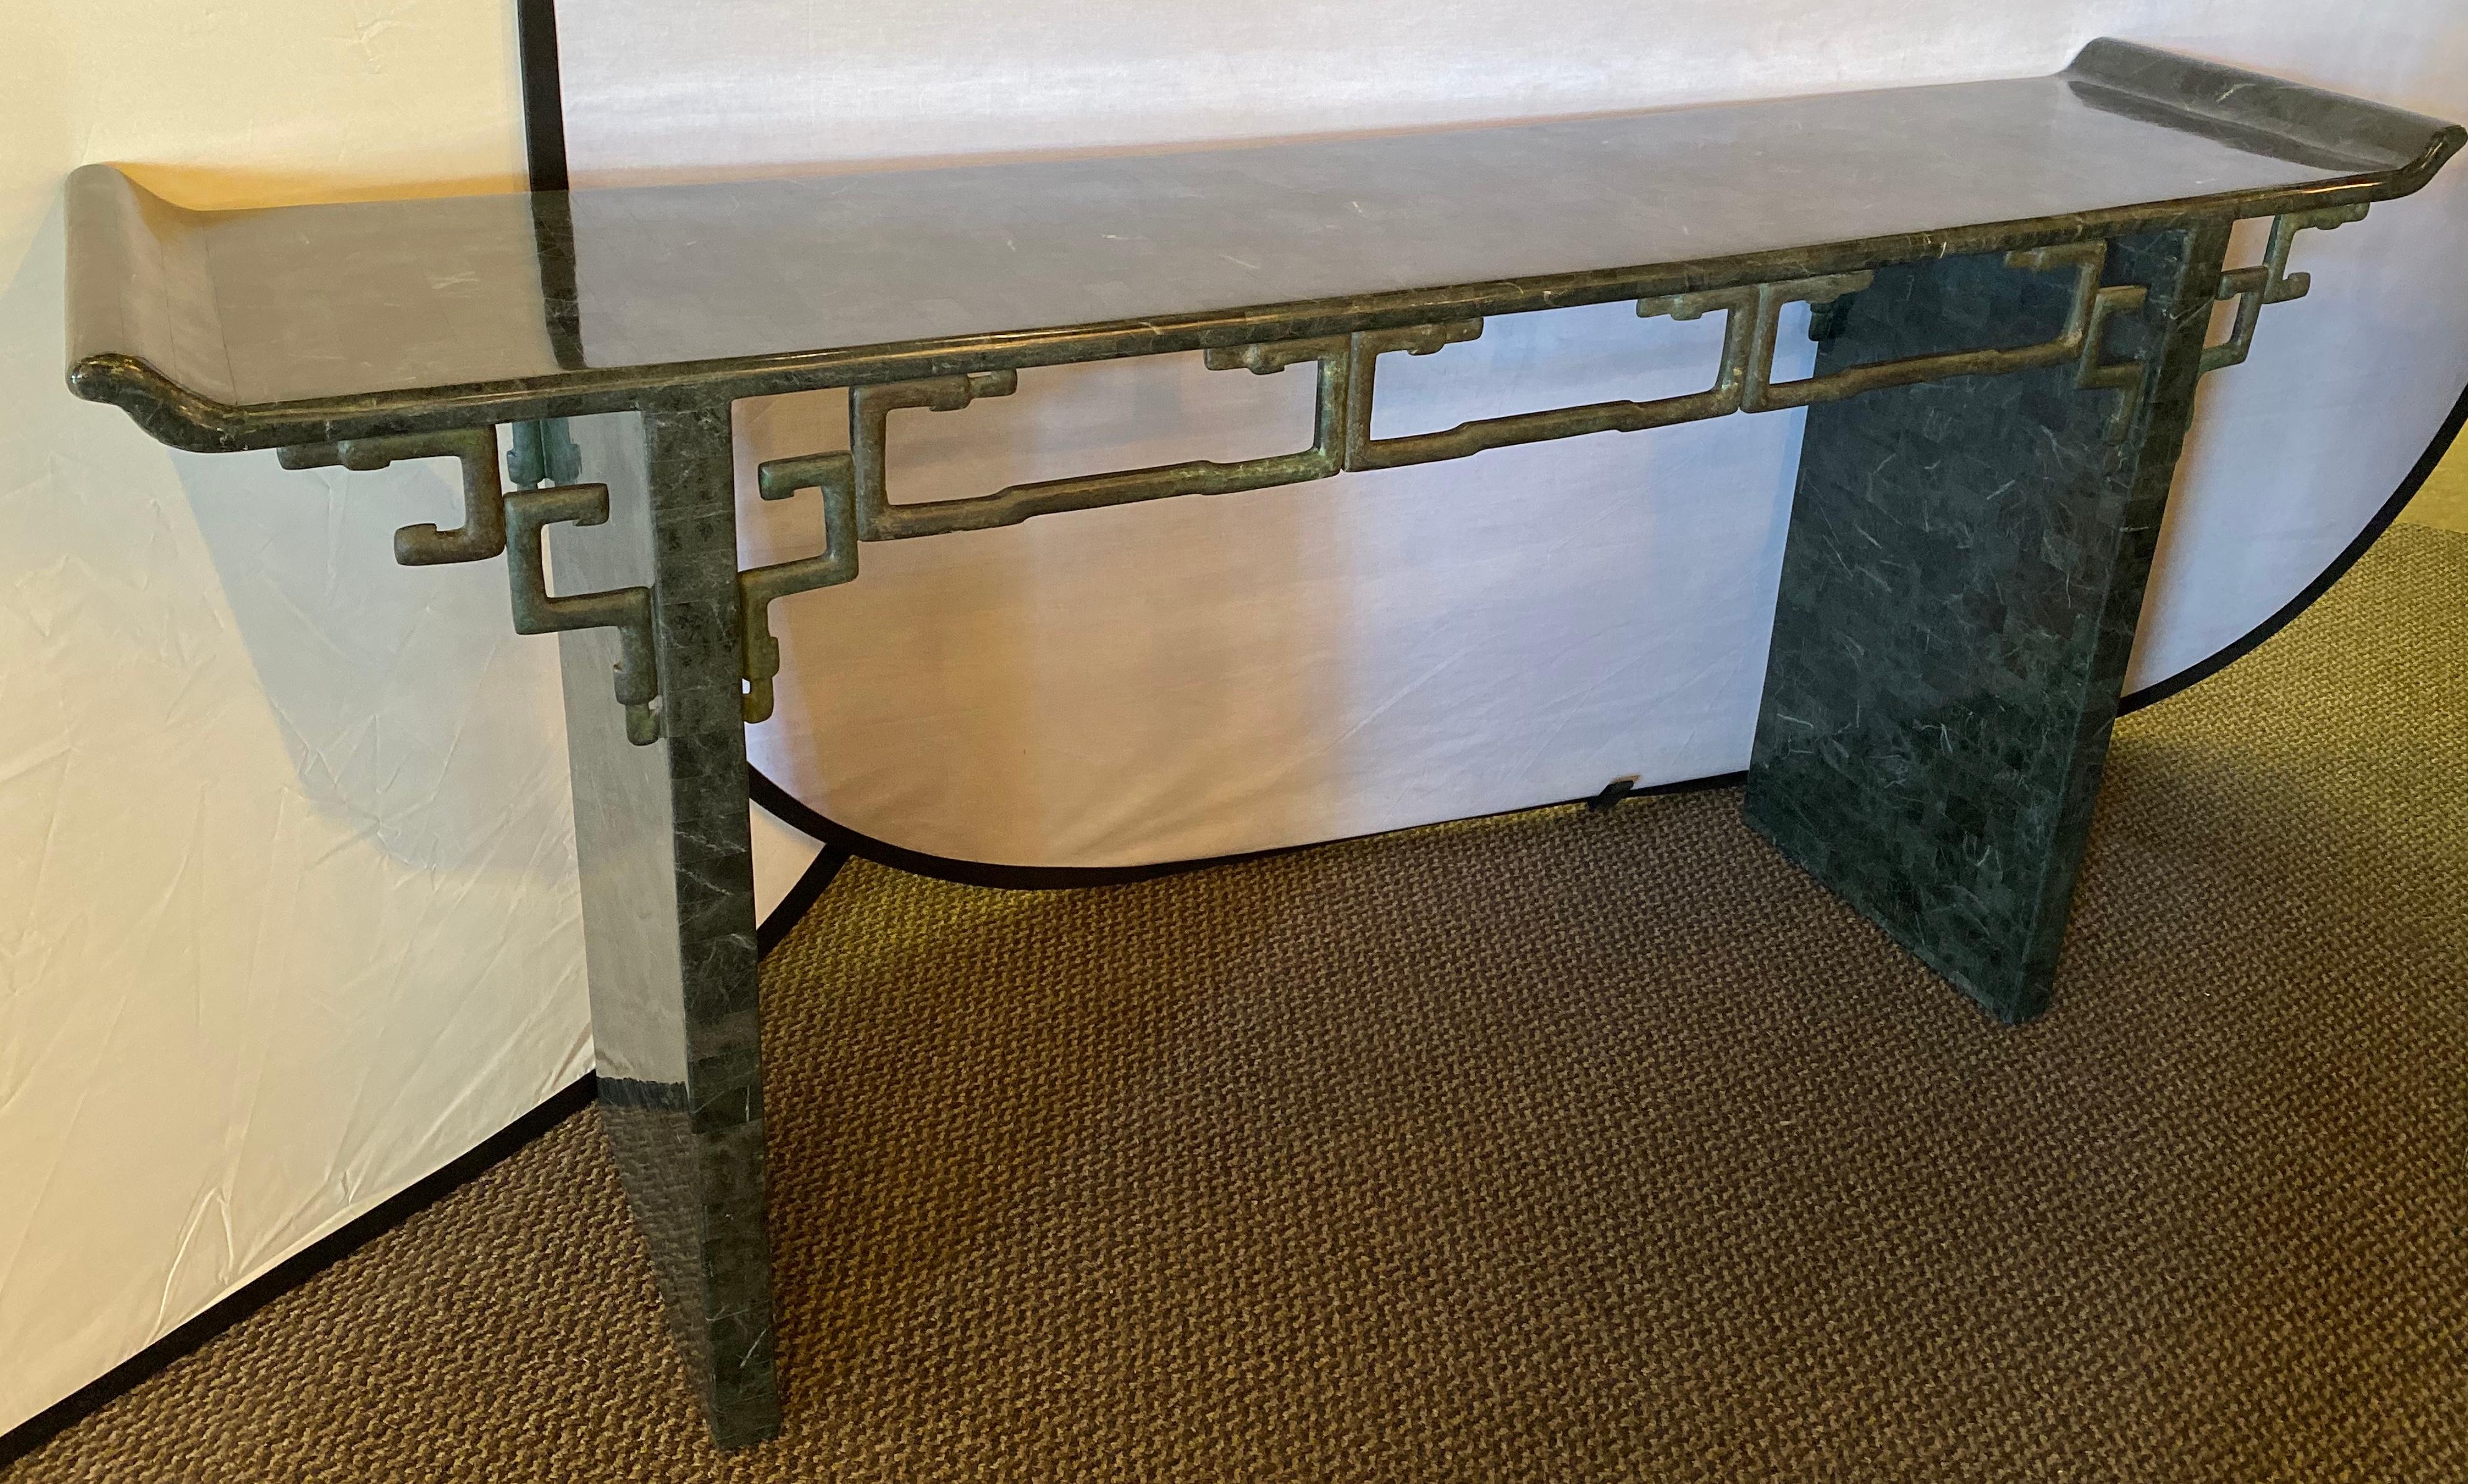 A tessellated Enrique Garcel console or alter table having an Asian flair. This finely decorative console alter table will not disappoint. The Garcel style frame depicts the mixture of Asian influence with Mid-Century Modern design at its peak. The